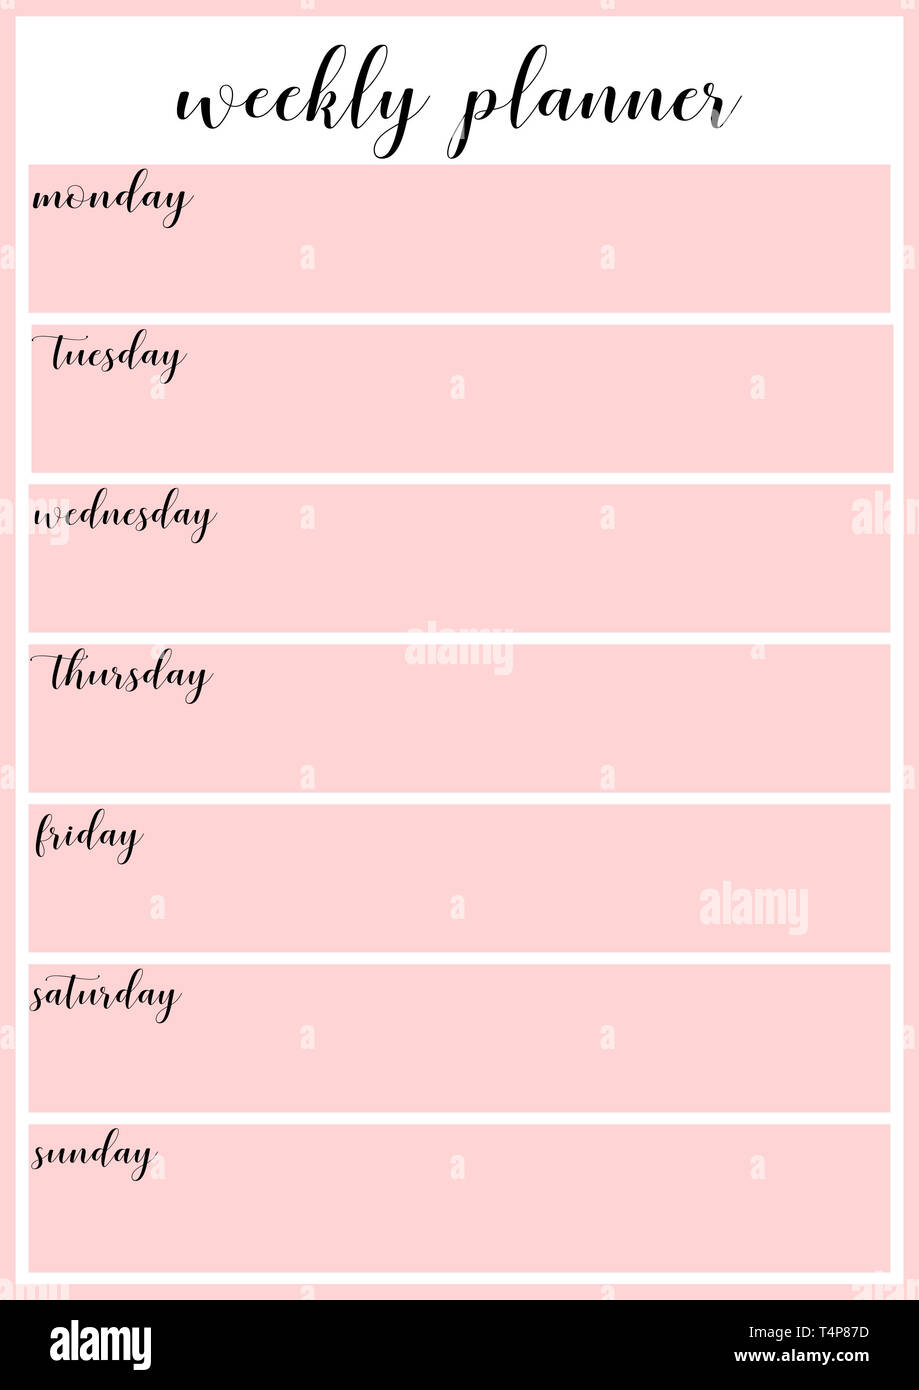 Weekly Schedule Planner Template from c8.alamy.com